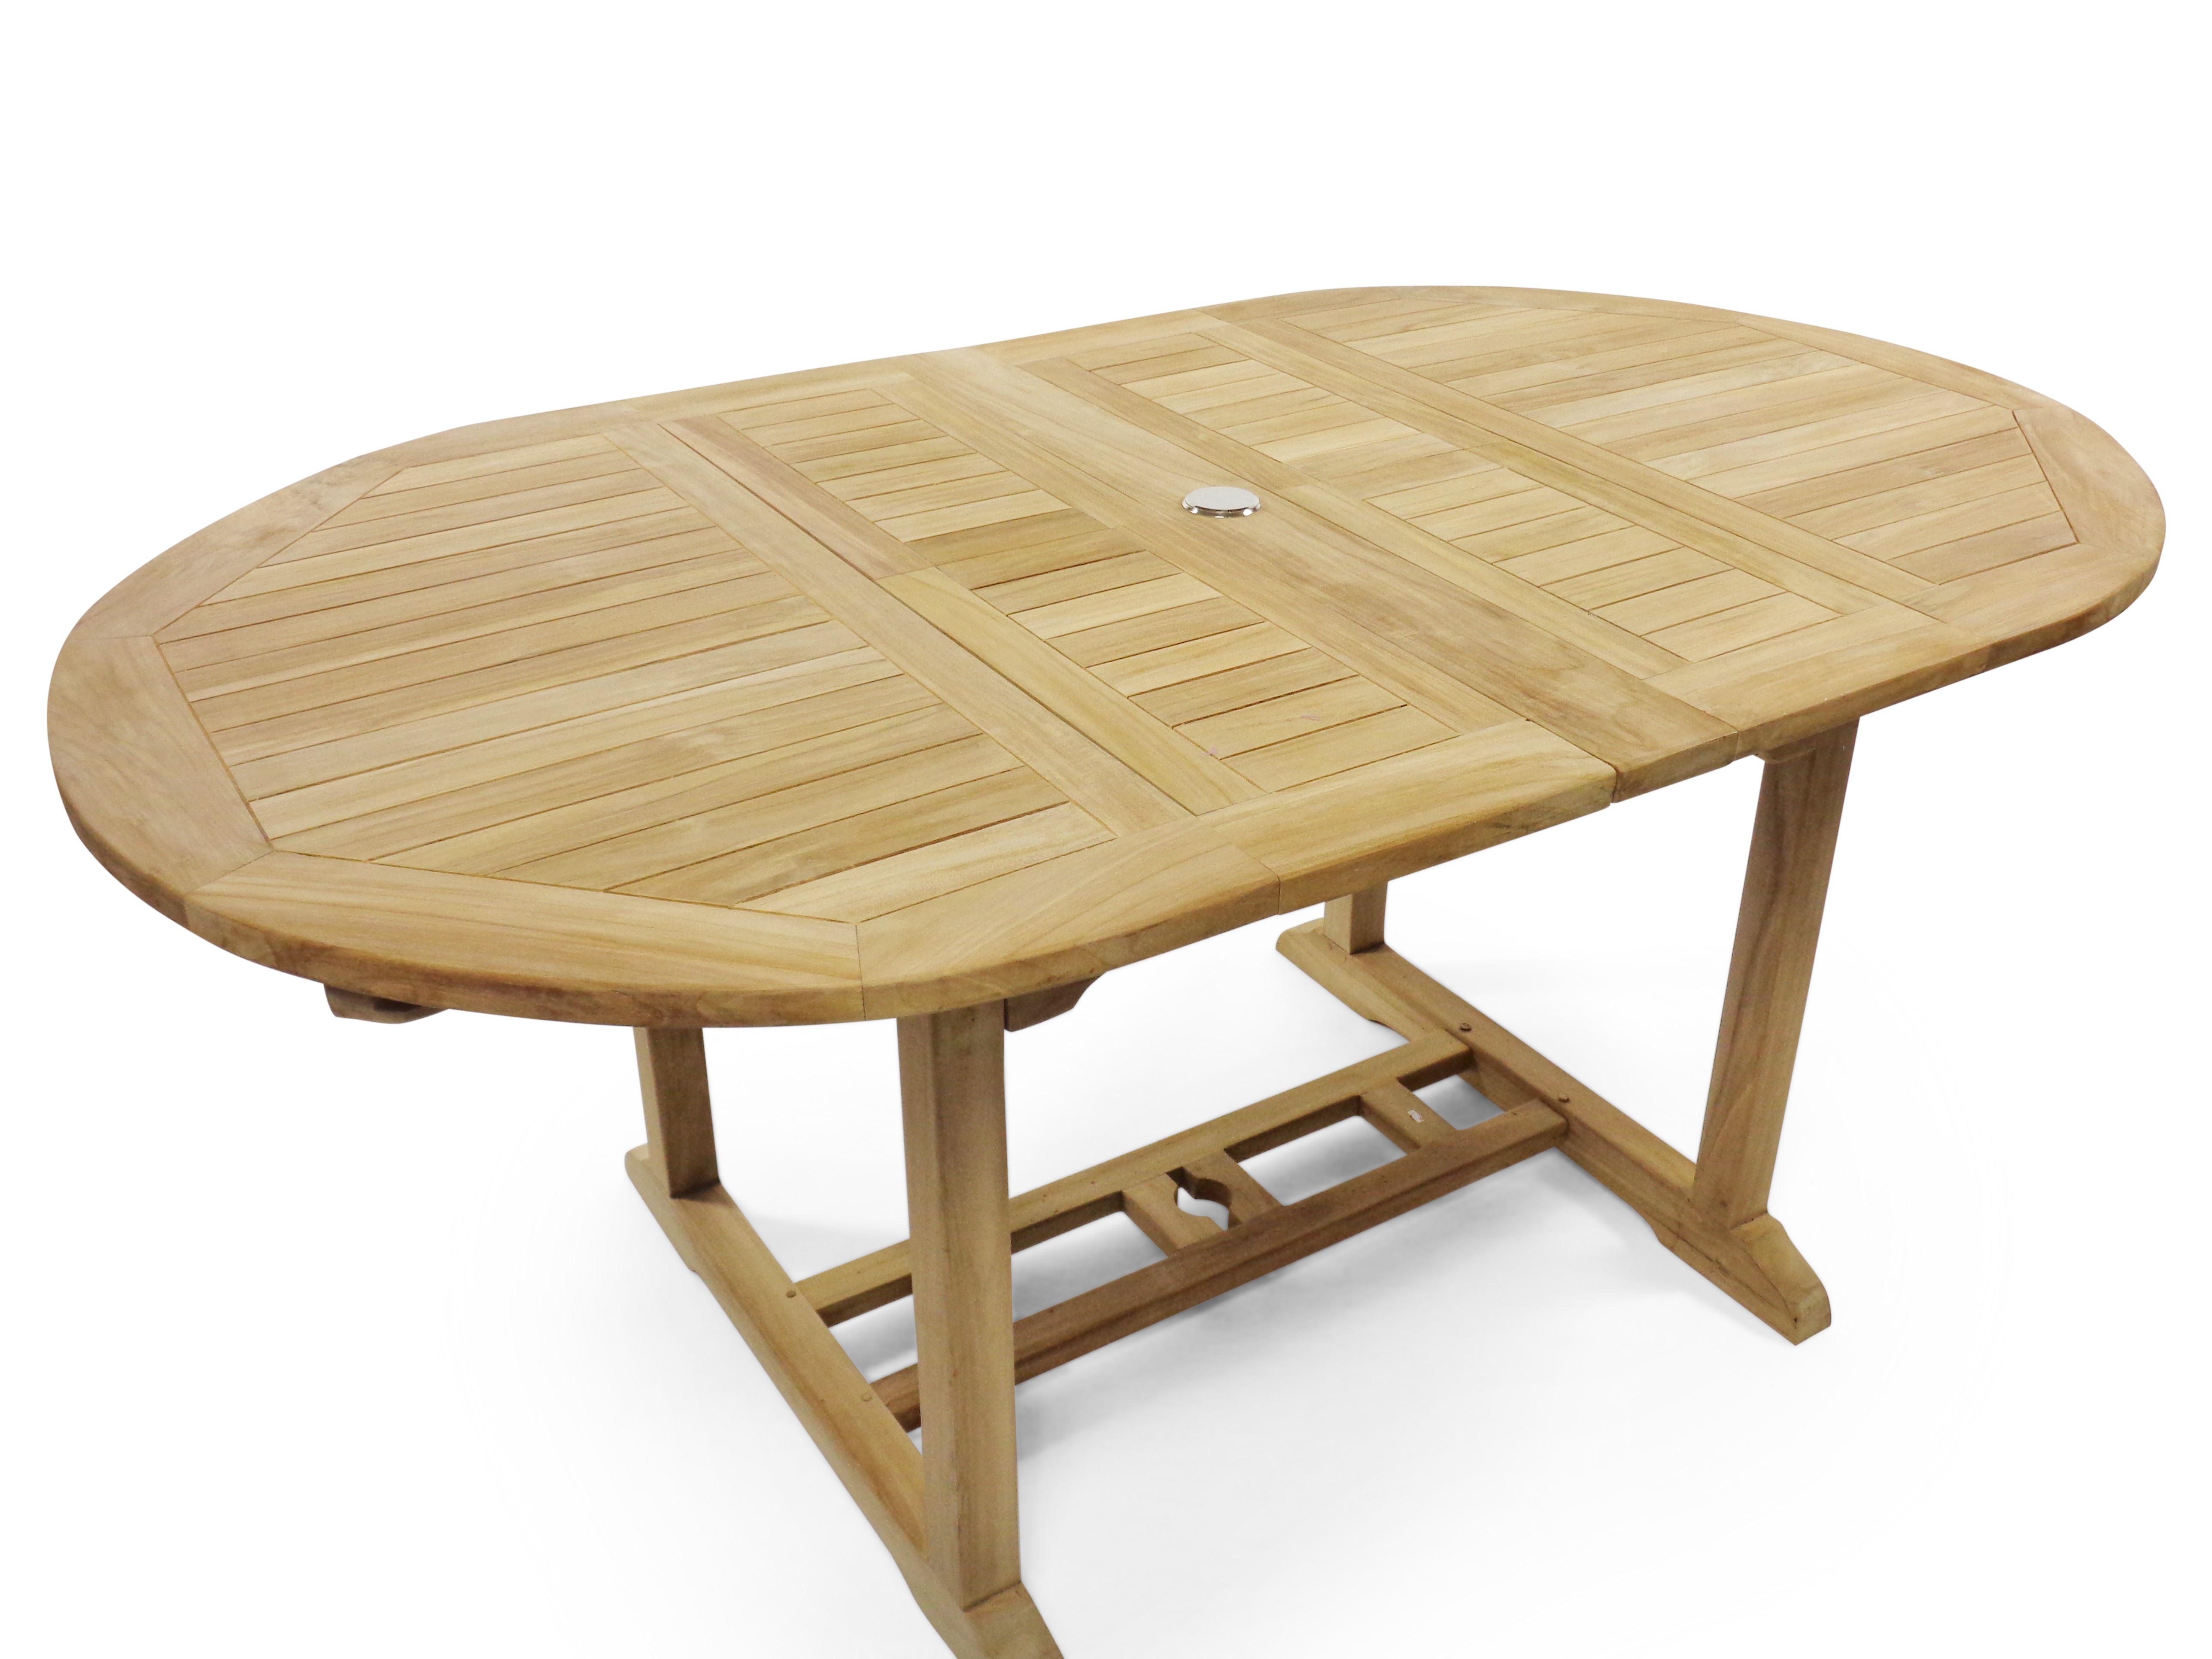 Bimini Counter Height 82" x 39" Double Leaf Oval Extension Table...Seats 8...makes 3 Different Size Tables